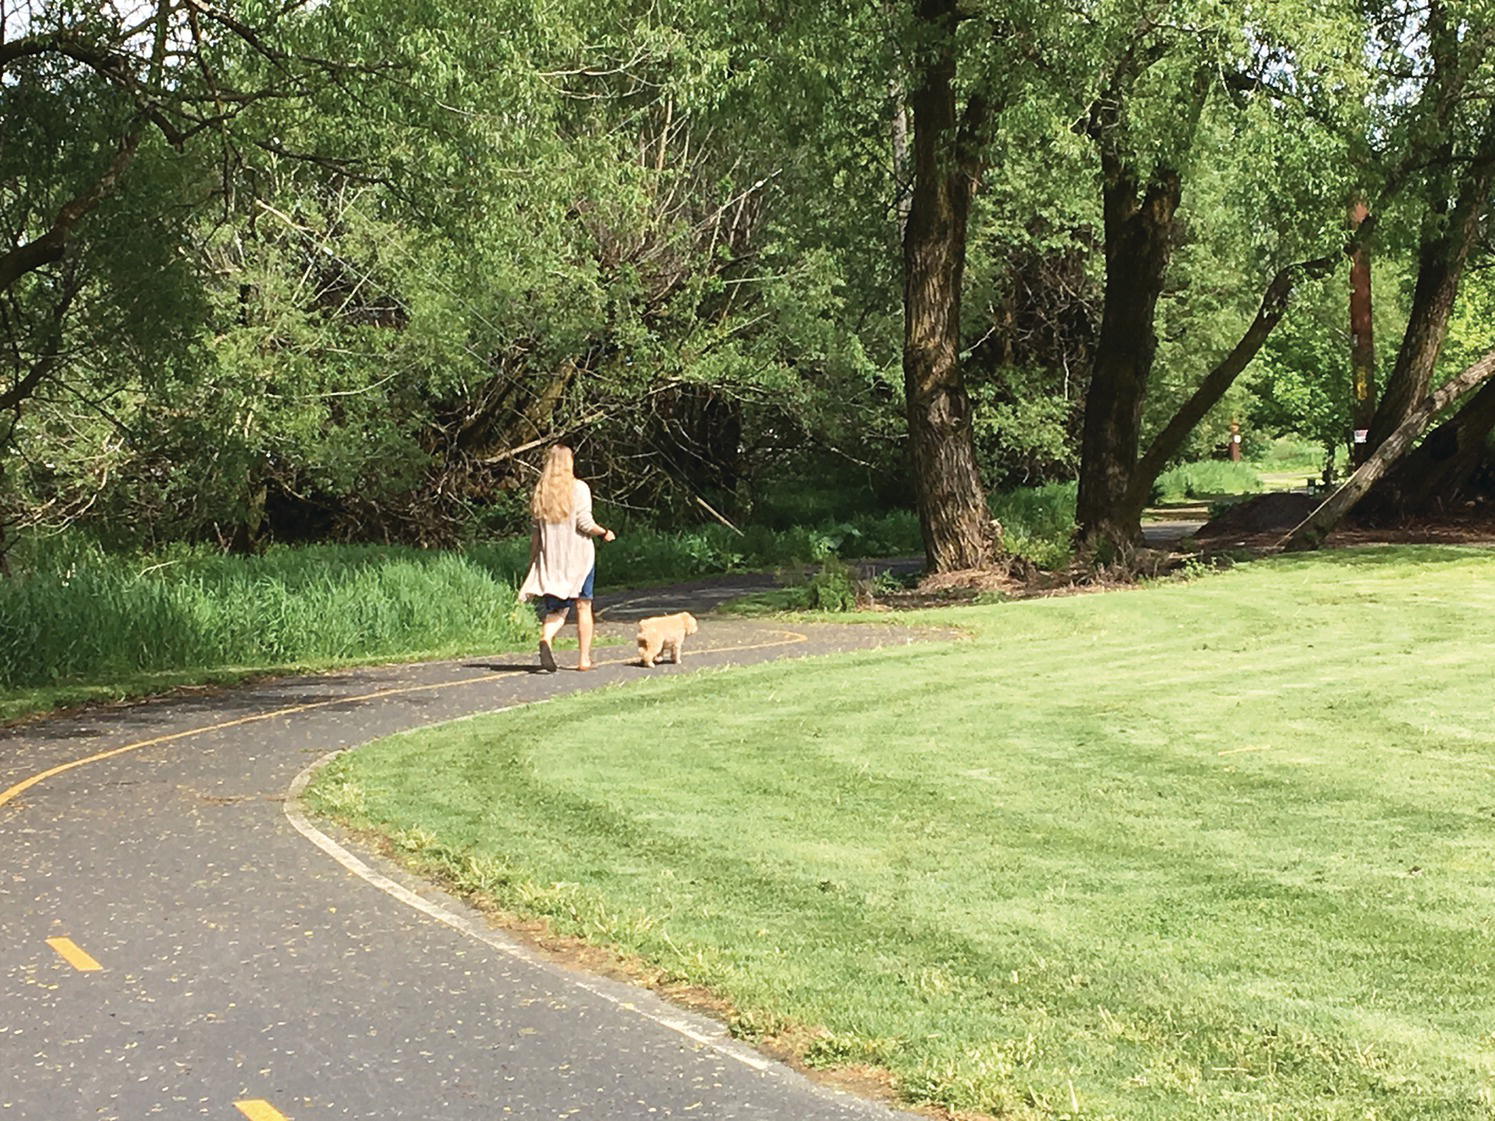 Photo of the Greenway in Boise, Idaho, USA, with lawns and trees on both sides of the way and petals strewn all over way.